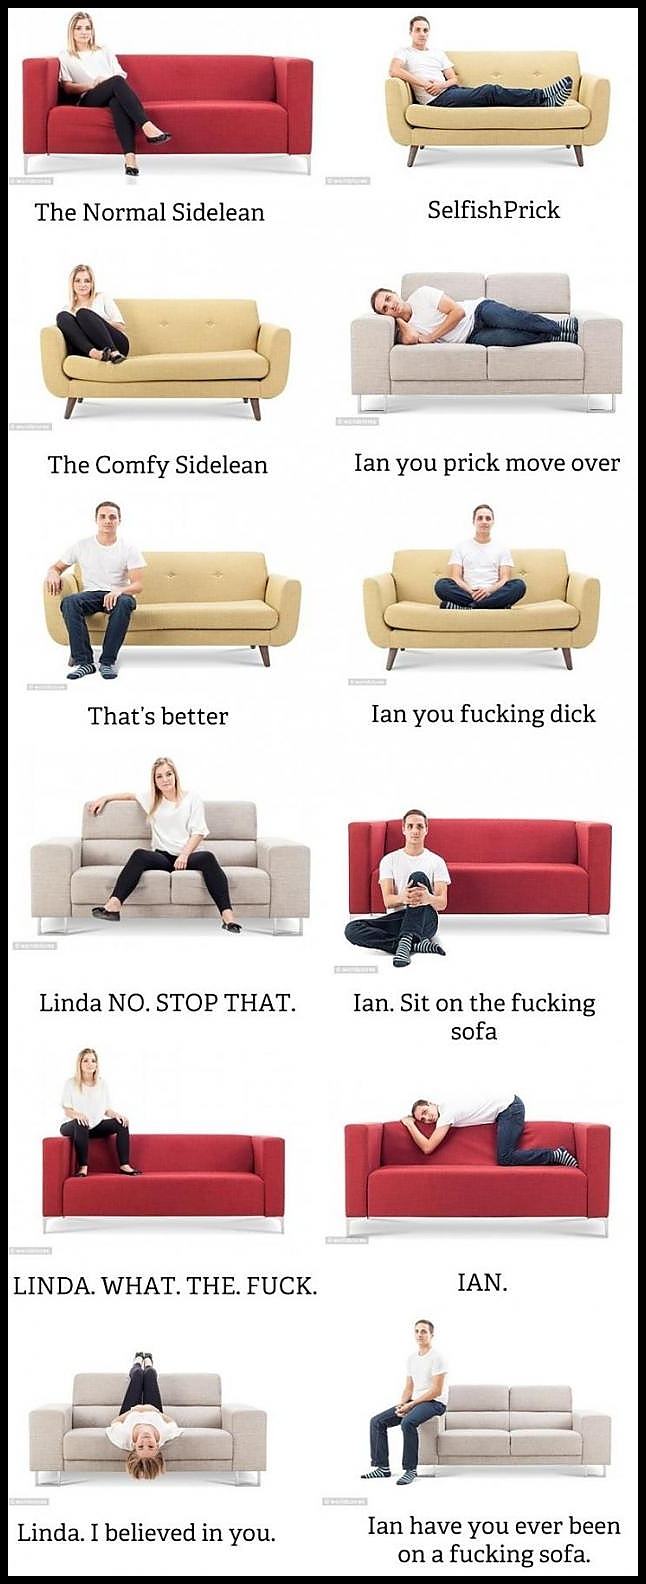 Obrázek Ian have you ever been on a fucking sofa